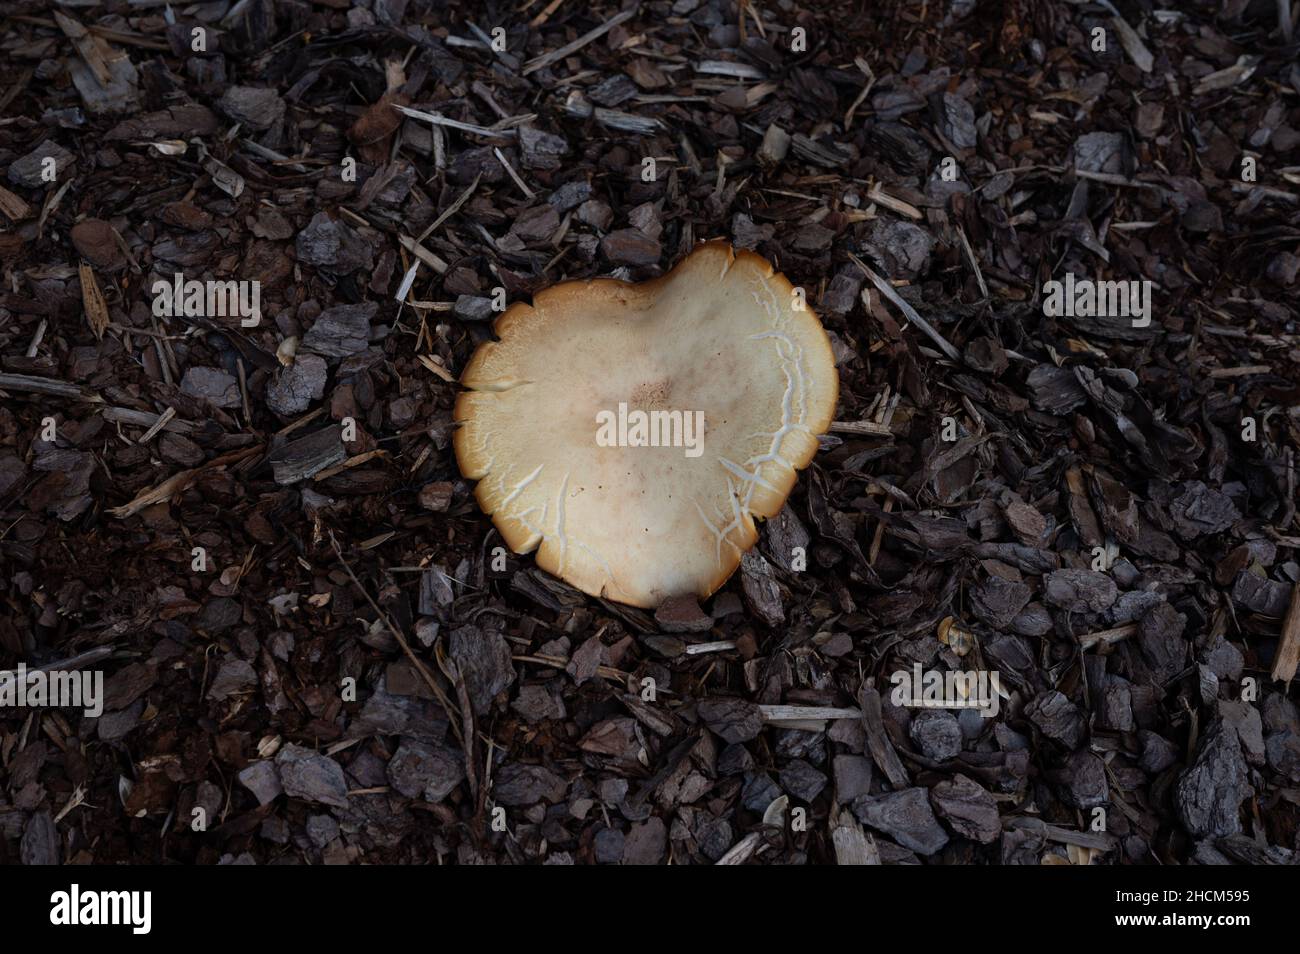 Top view of a fairy ring mushroom growing on the ground surrounded by leaves Stock Photo